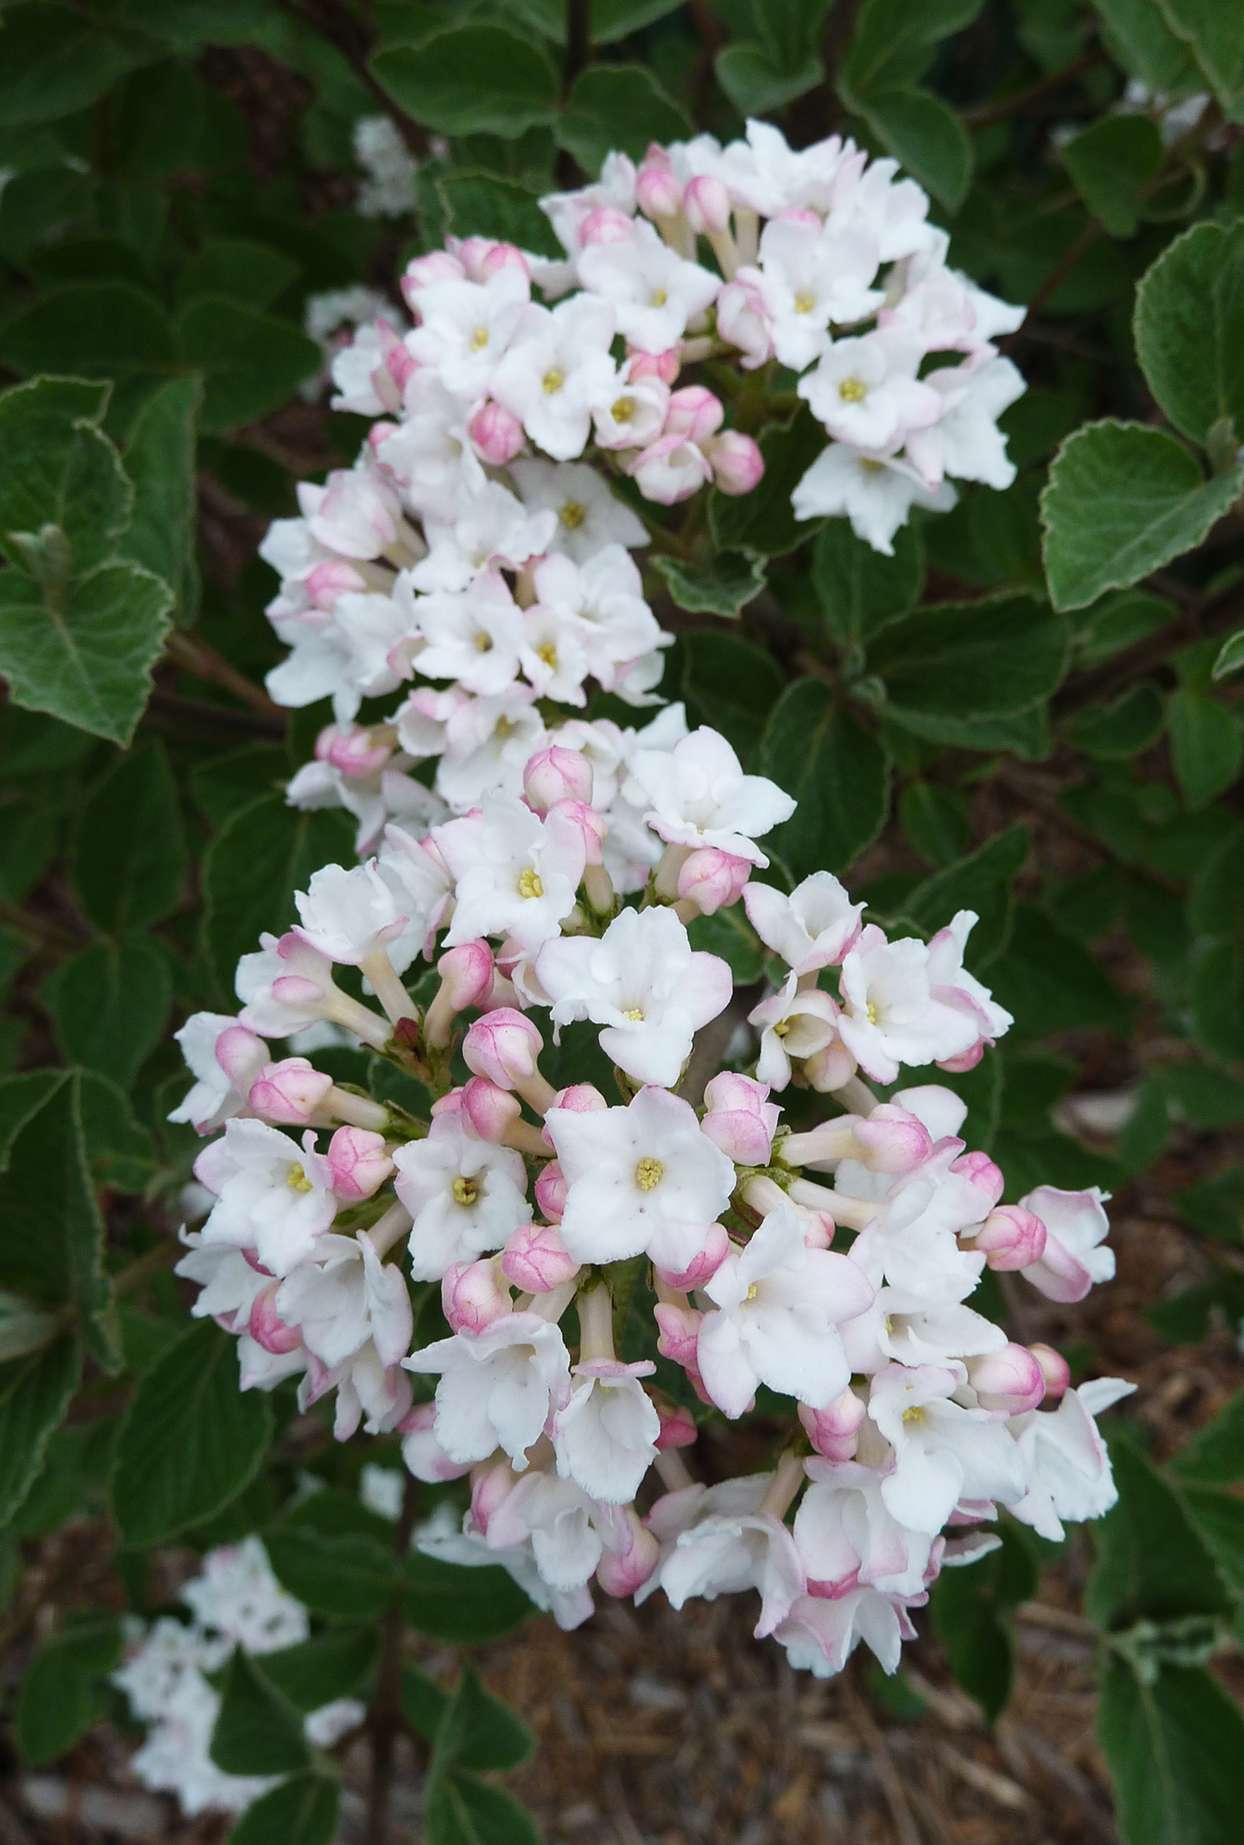 white and pink clusters of viburnum flowers